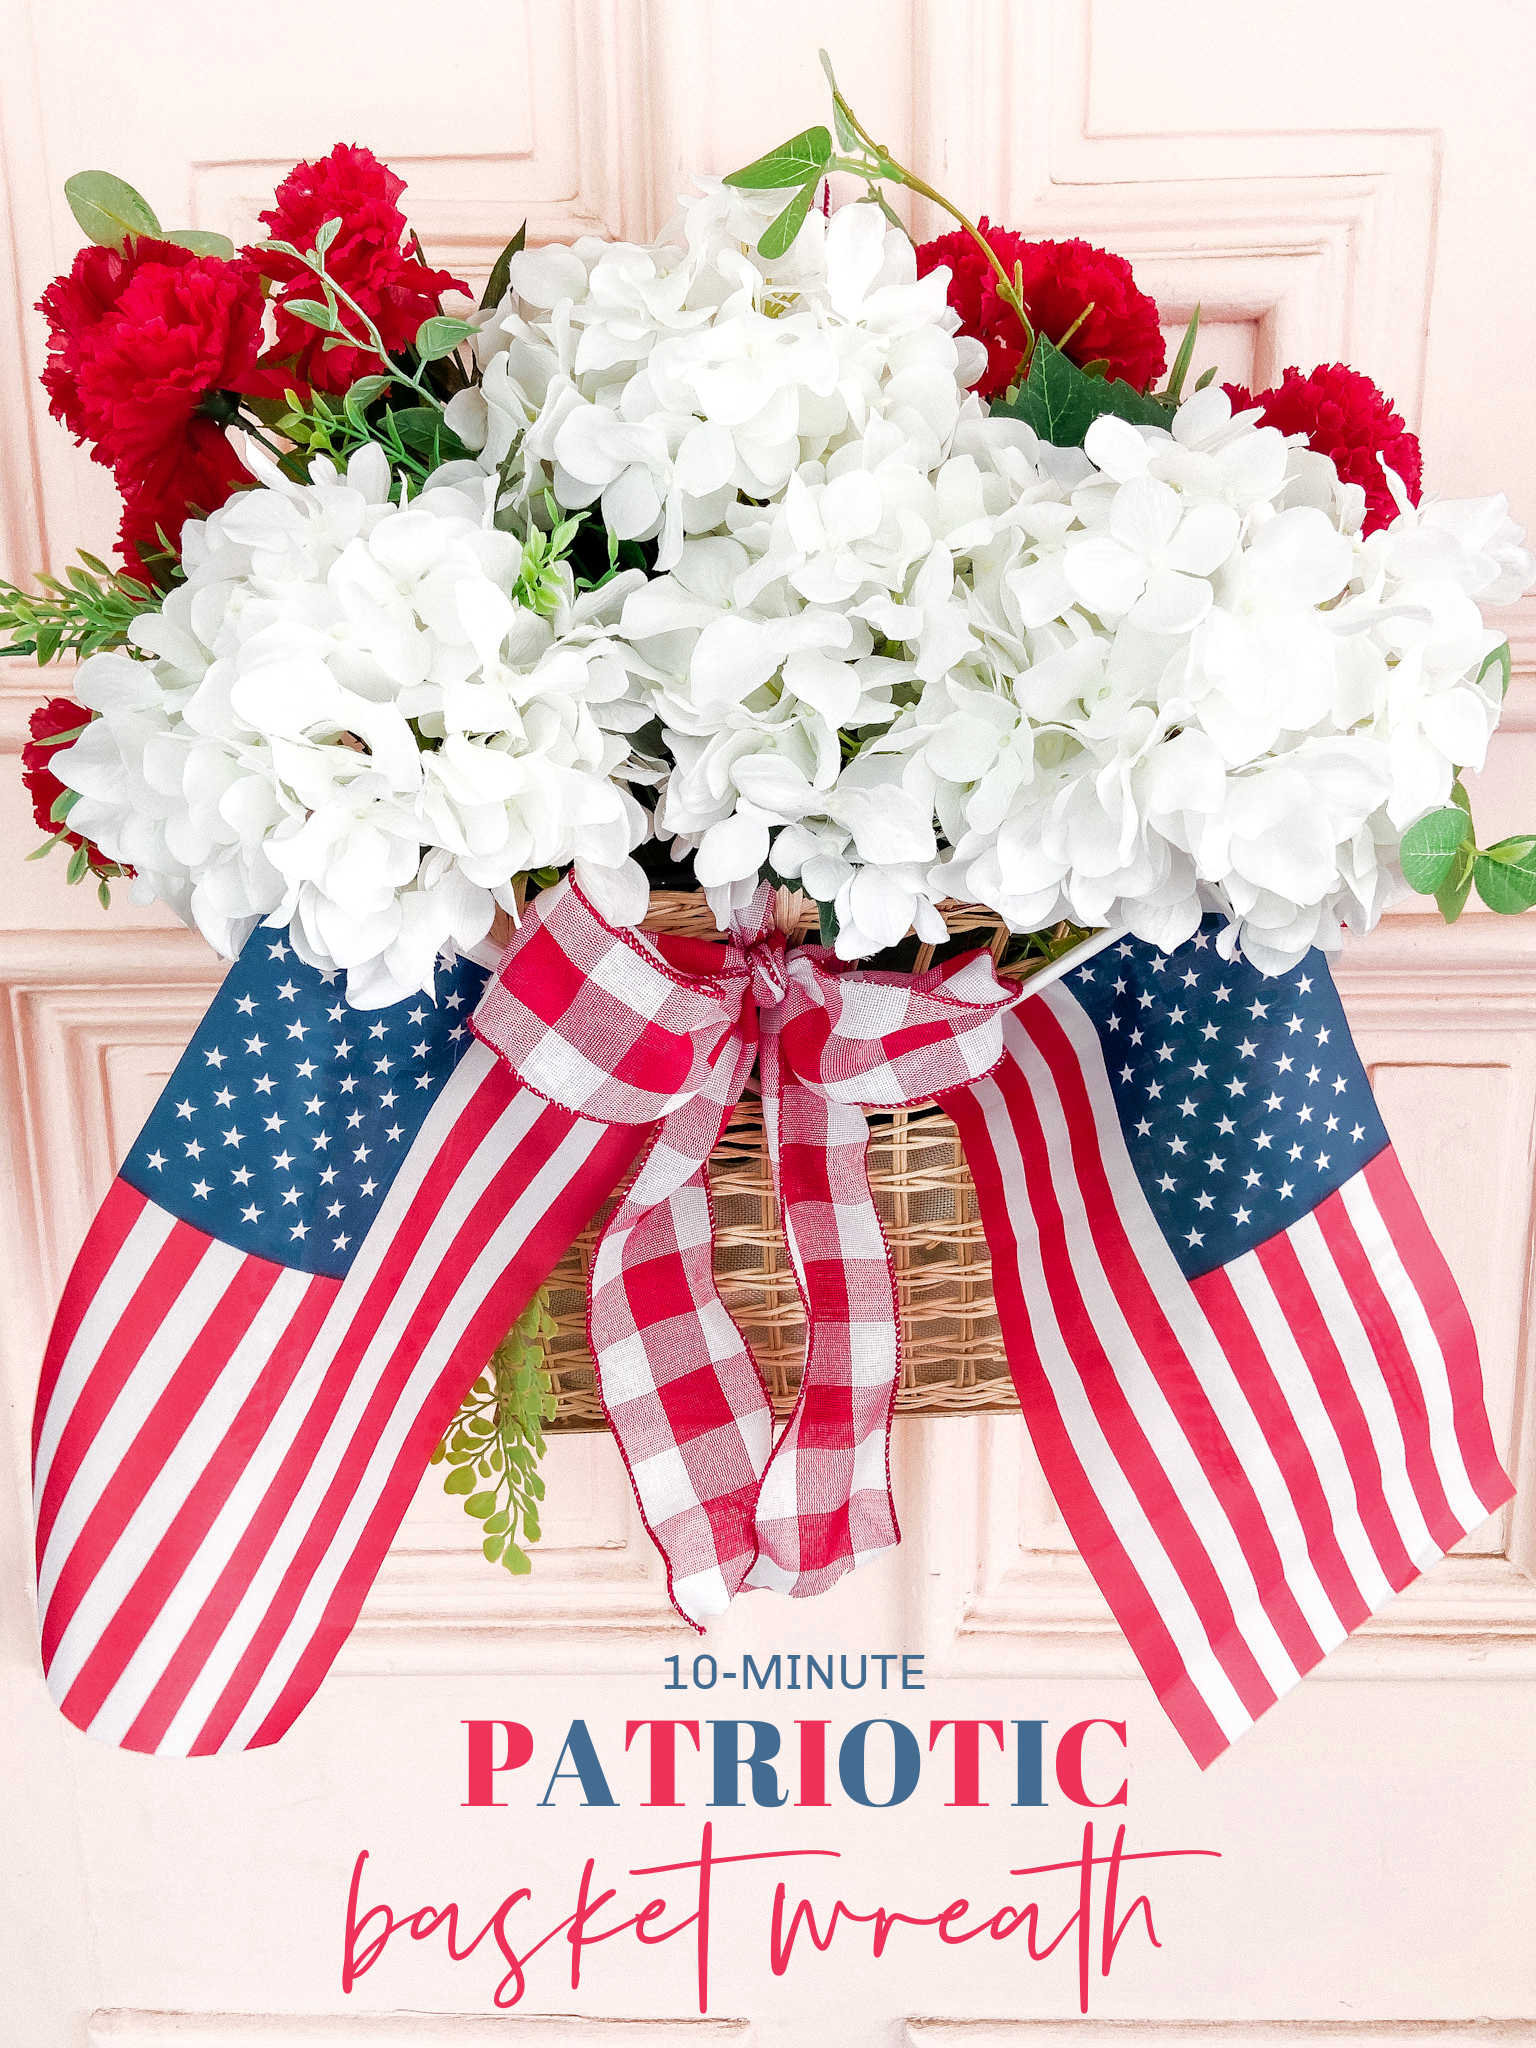 10-Minute Patriotic Basket Wreath. Make an easy and festive fourth of july wreath in just minutes! 